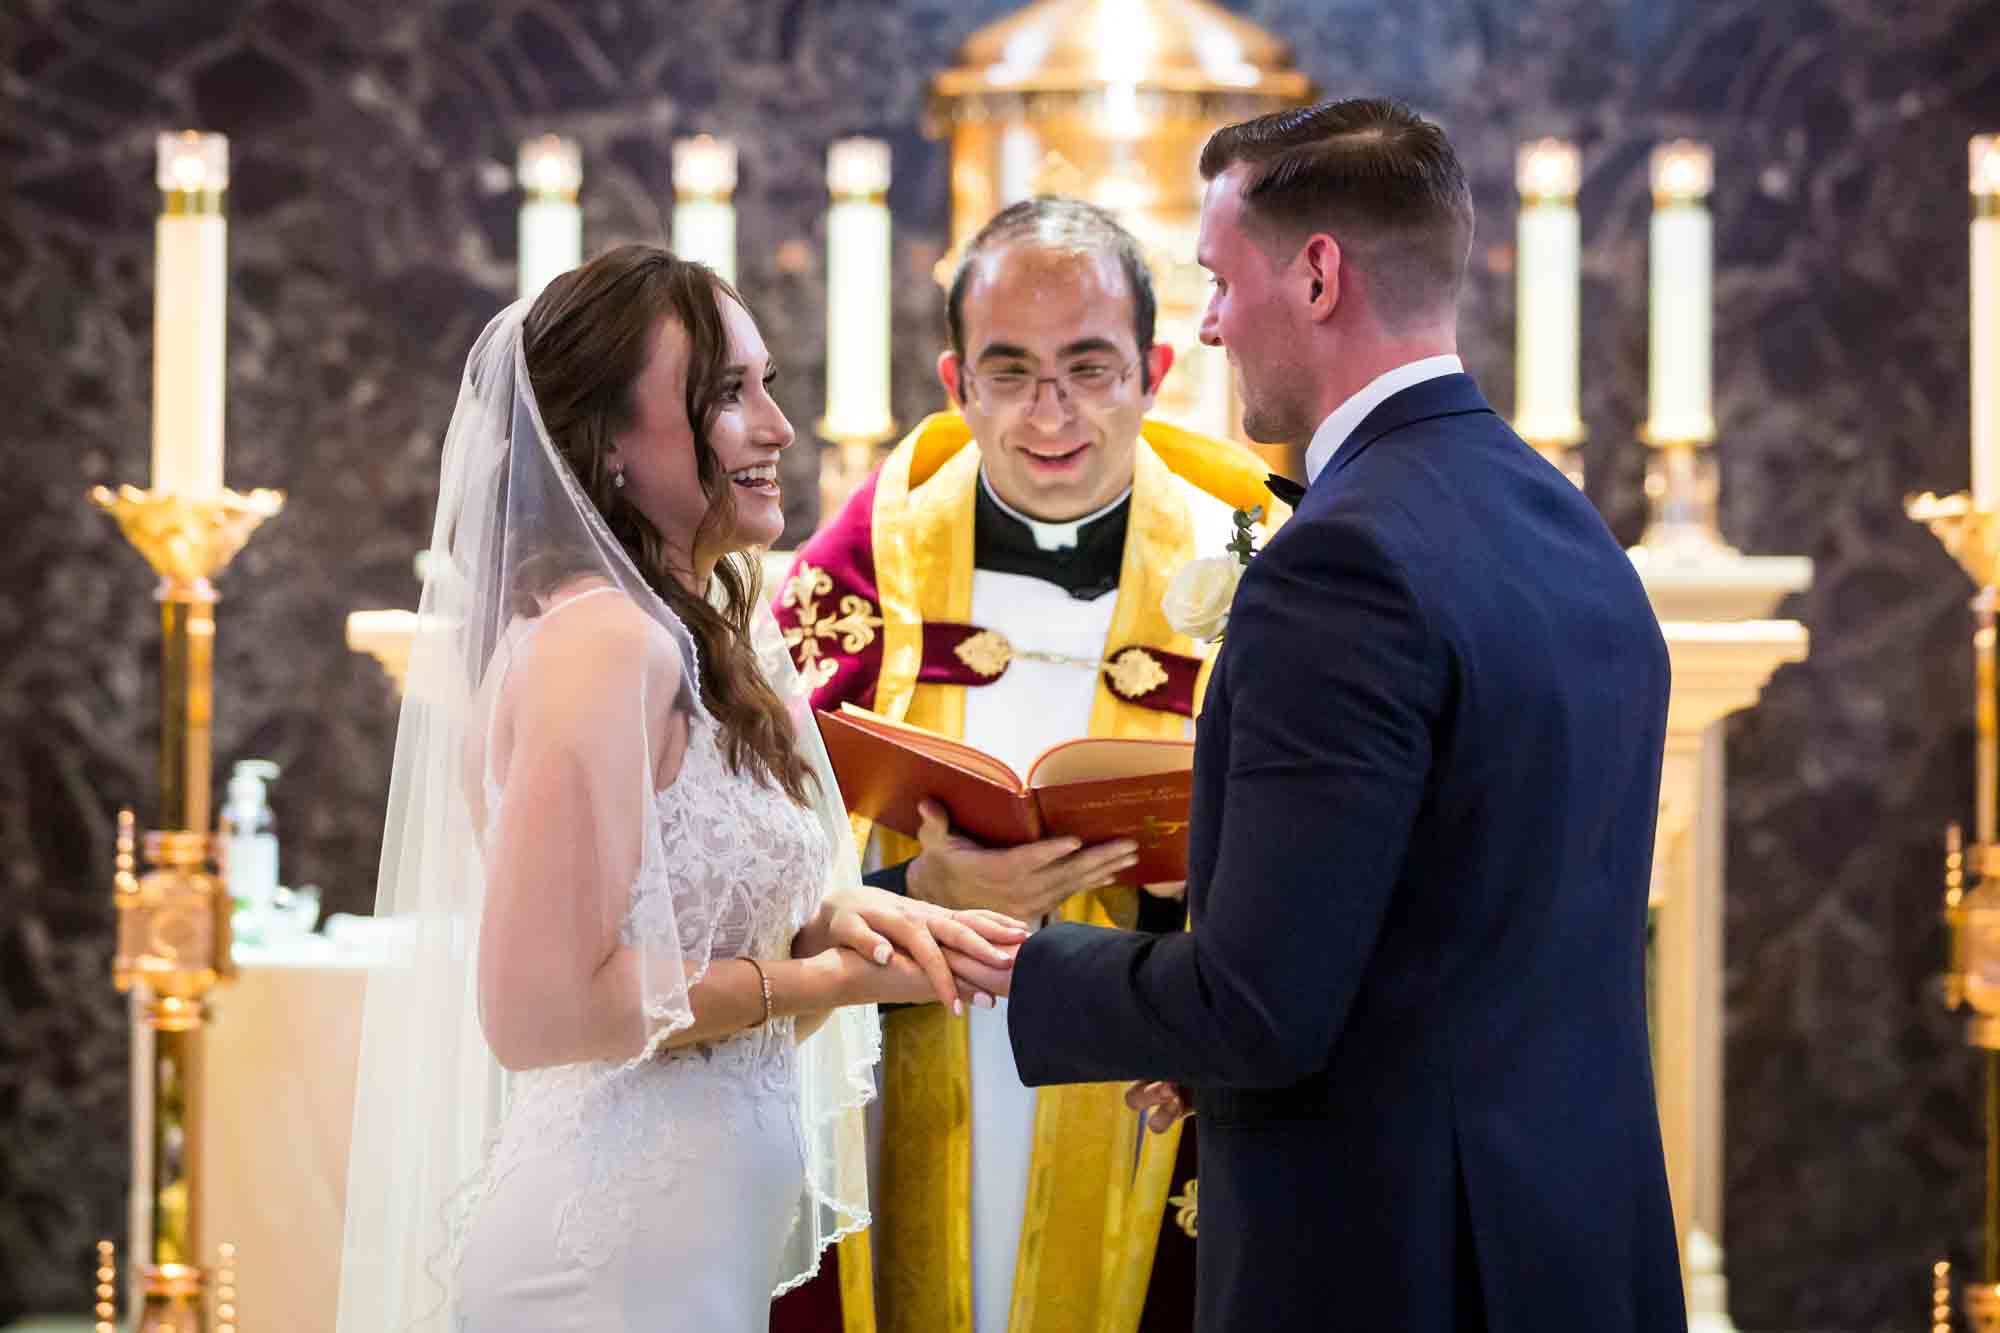 Bride and groom exchanging rings in church